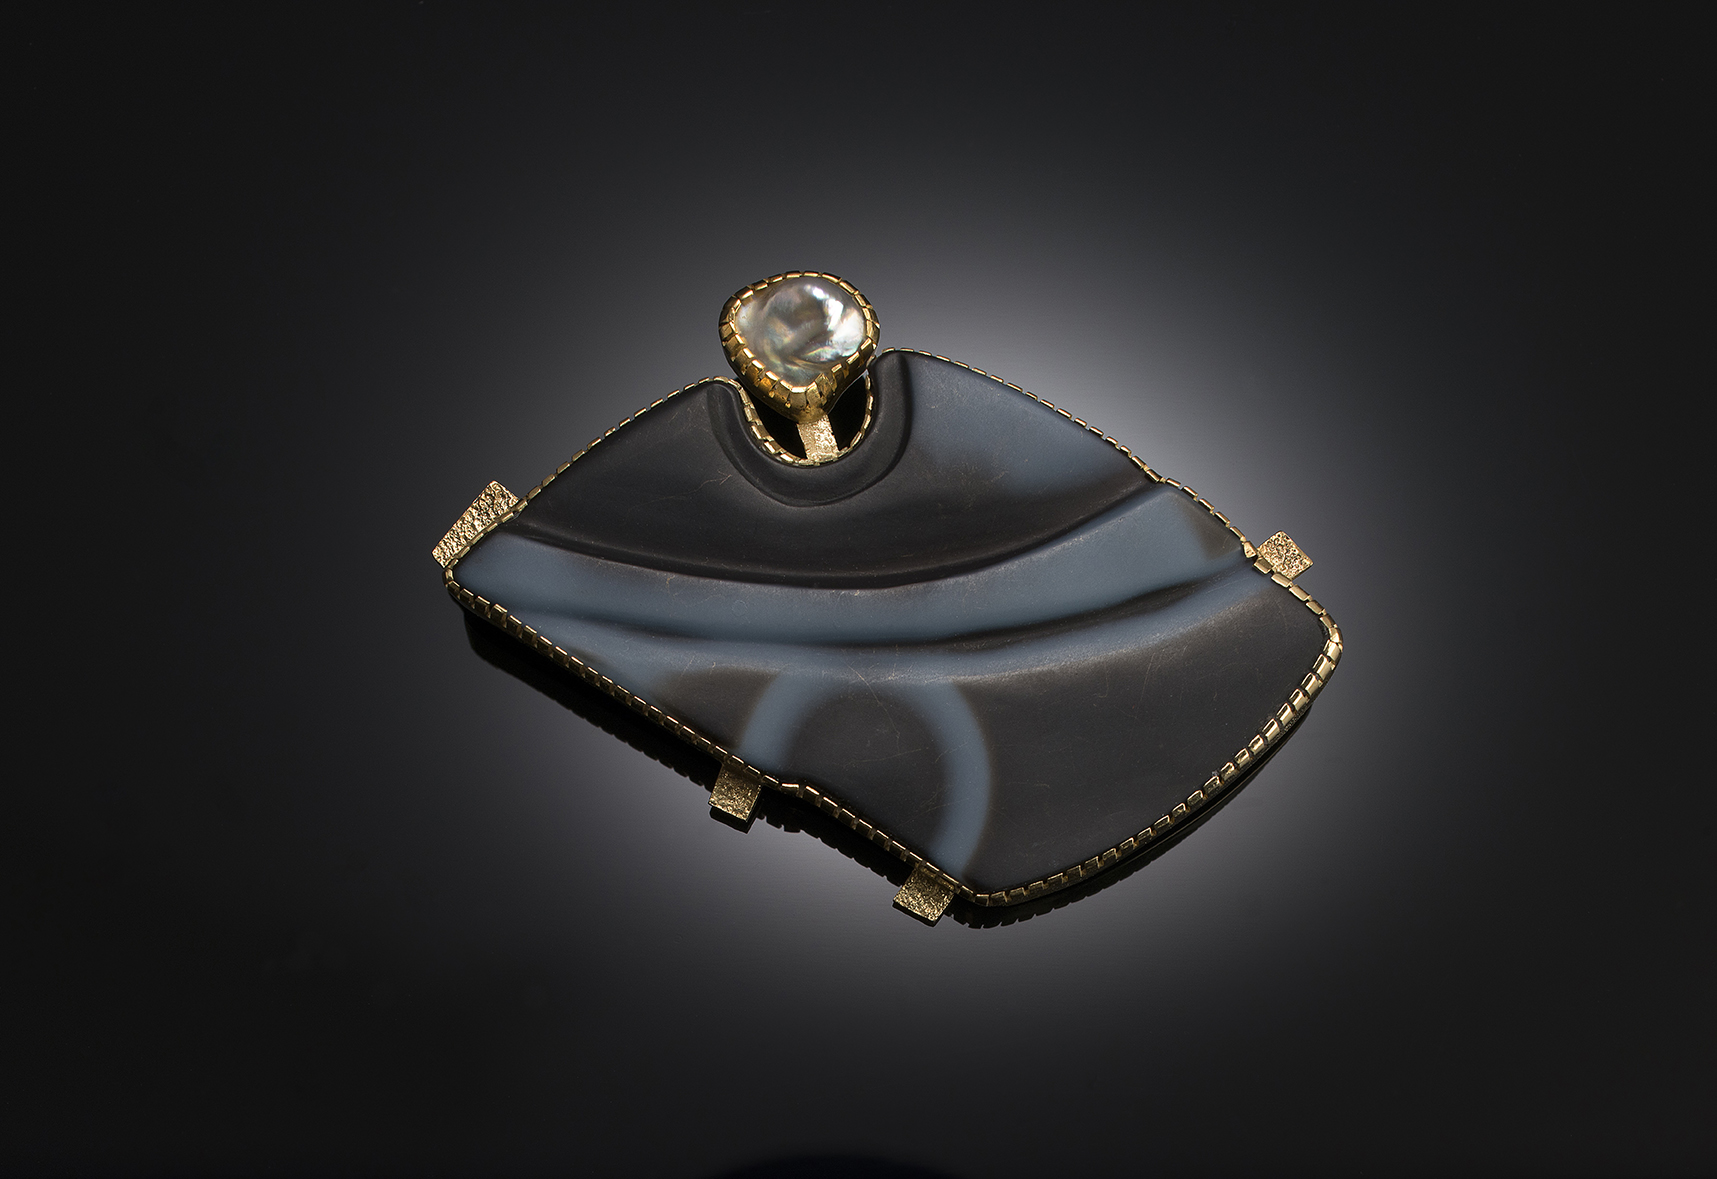 An agate and diamond pendant on a black background.